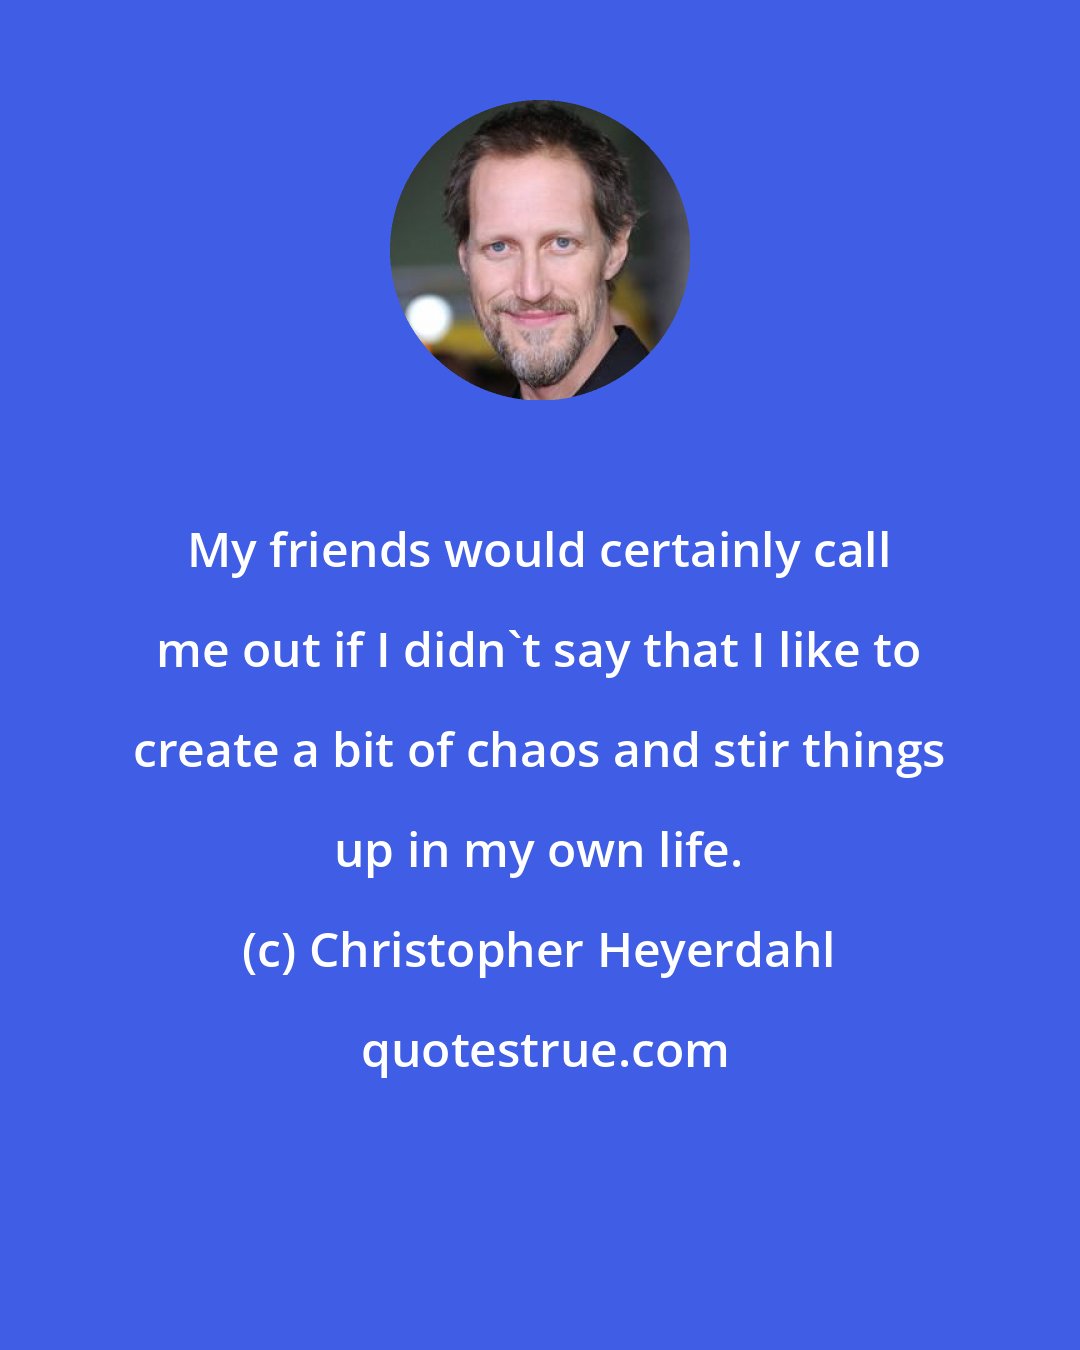 Christopher Heyerdahl: My friends would certainly call me out if I didn't say that I like to create a bit of chaos and stir things up in my own life.